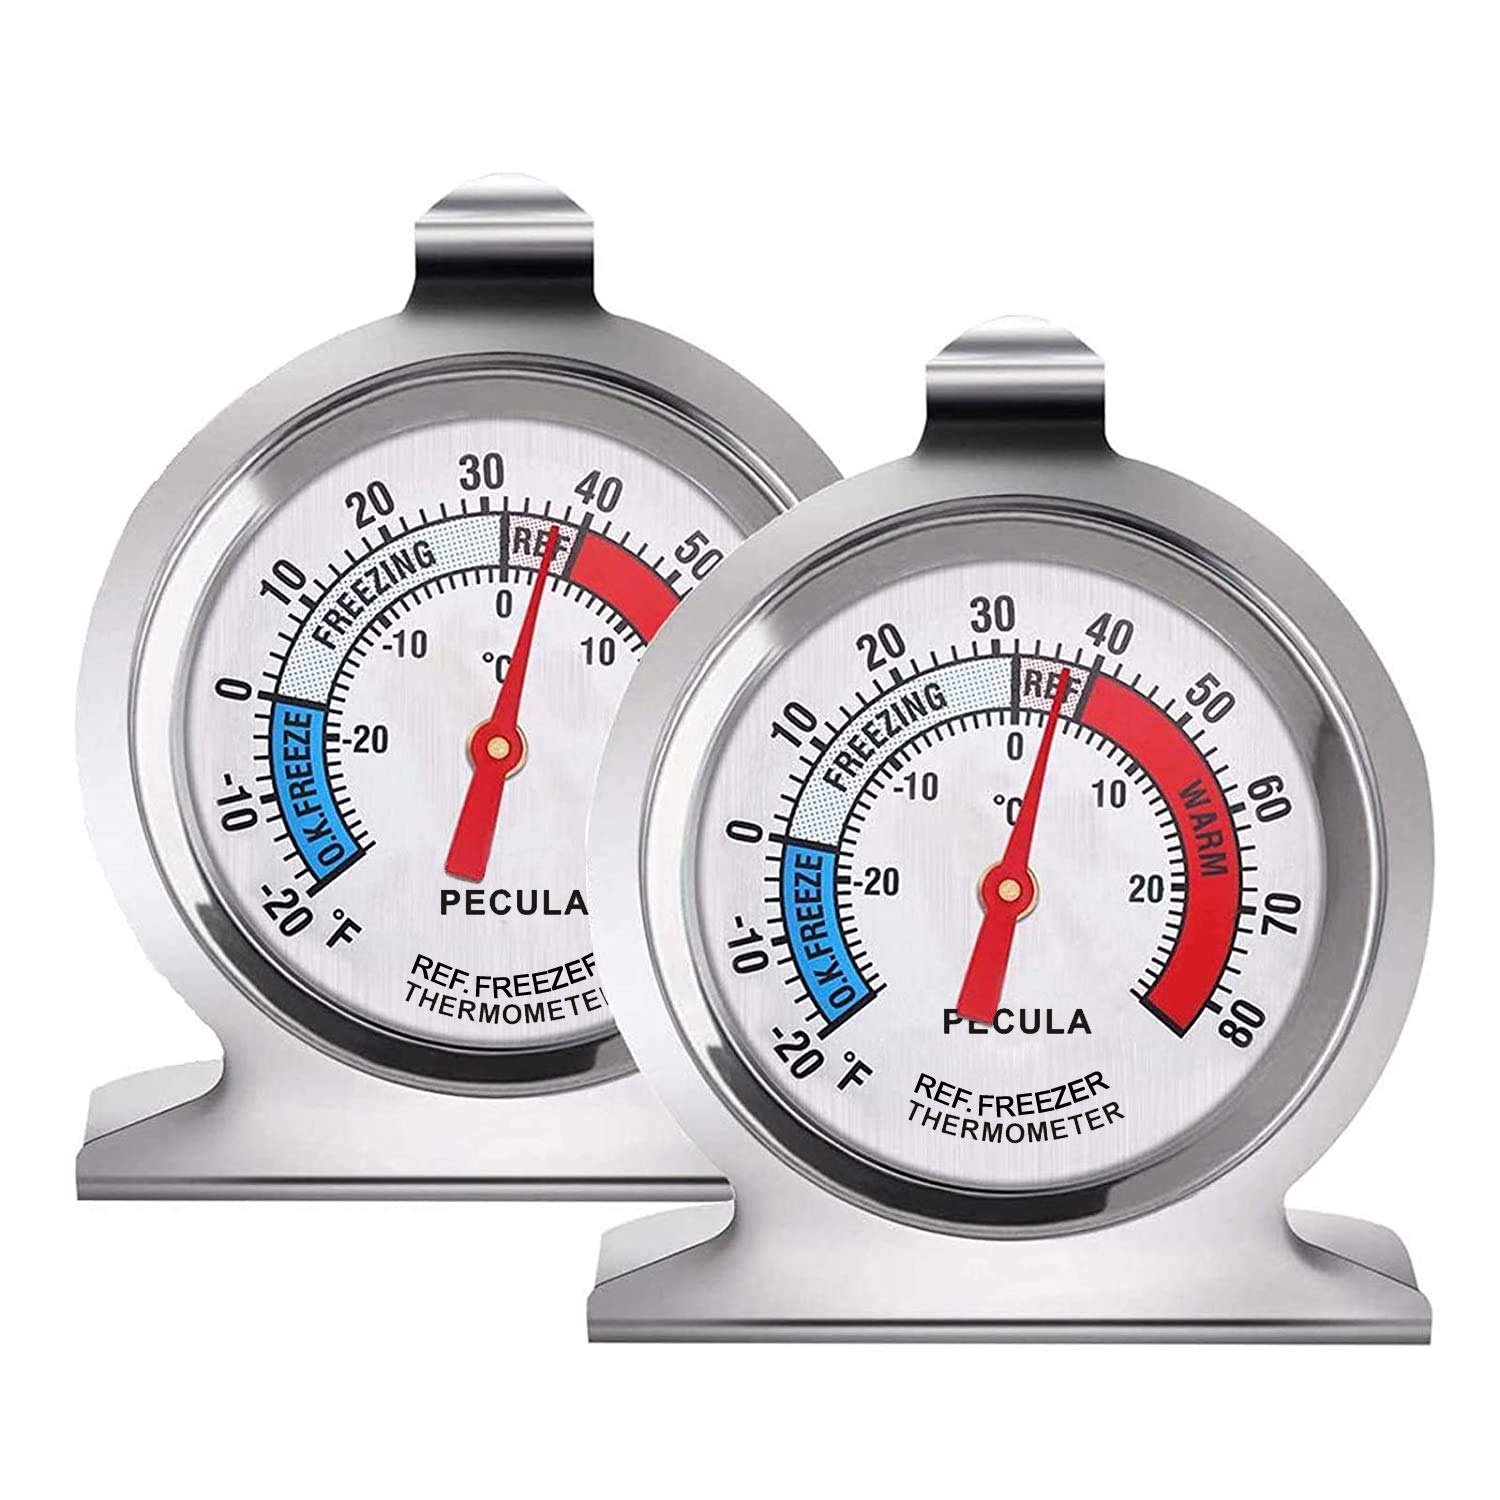 IN-197 PACK OF TWO CRESCENT DIAL FRIDGE FREEZER THERMOMETERS 